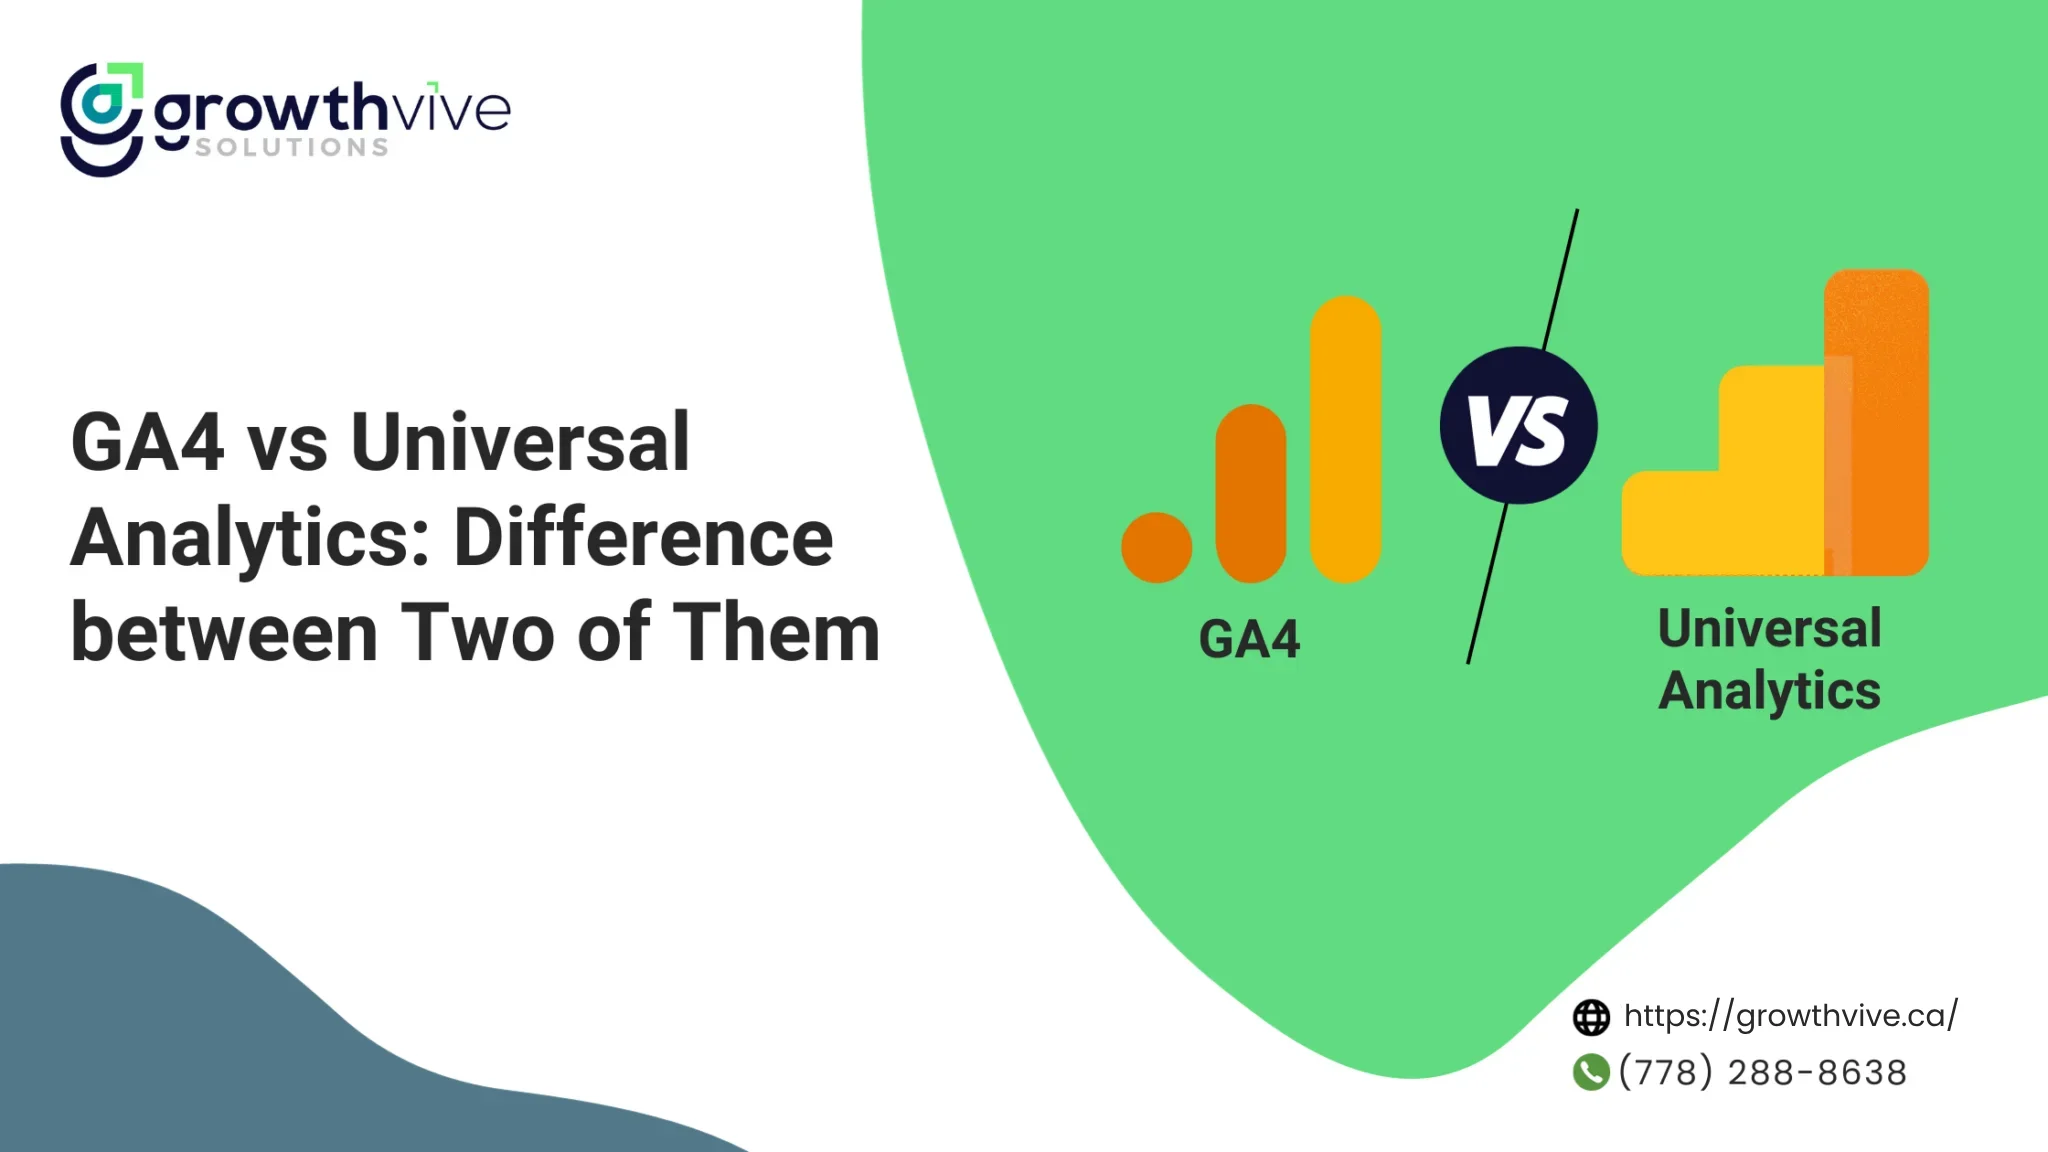 GA4 vs Universal Analytics: Difference between Two of Them